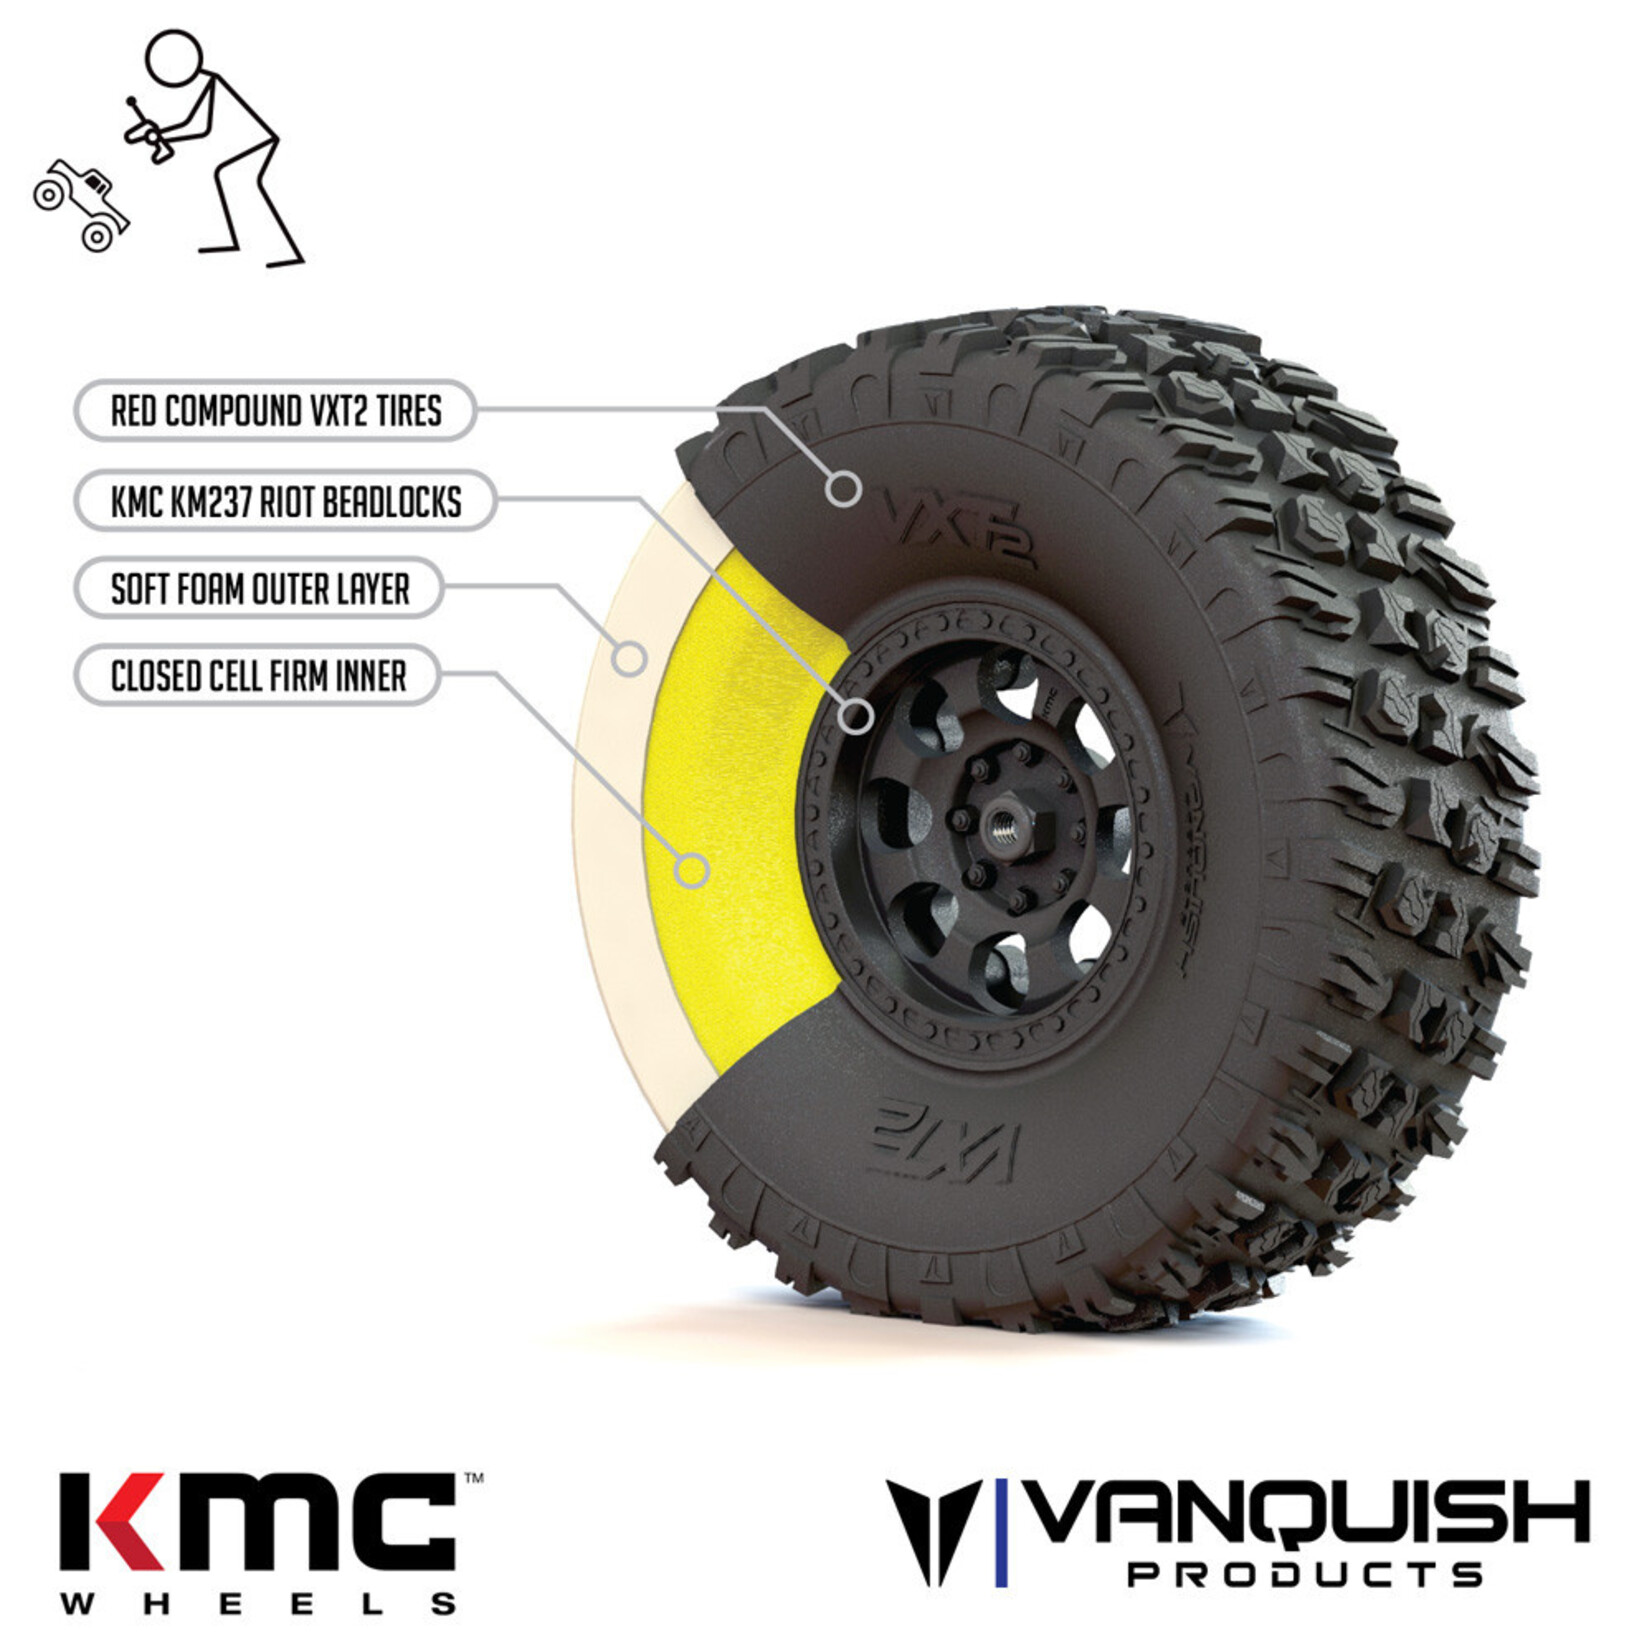 Vanquish Products Vanquish Products VTS Stance Dual Stage 4.75" 1.9" Crawler Foam (2) #VPS10306